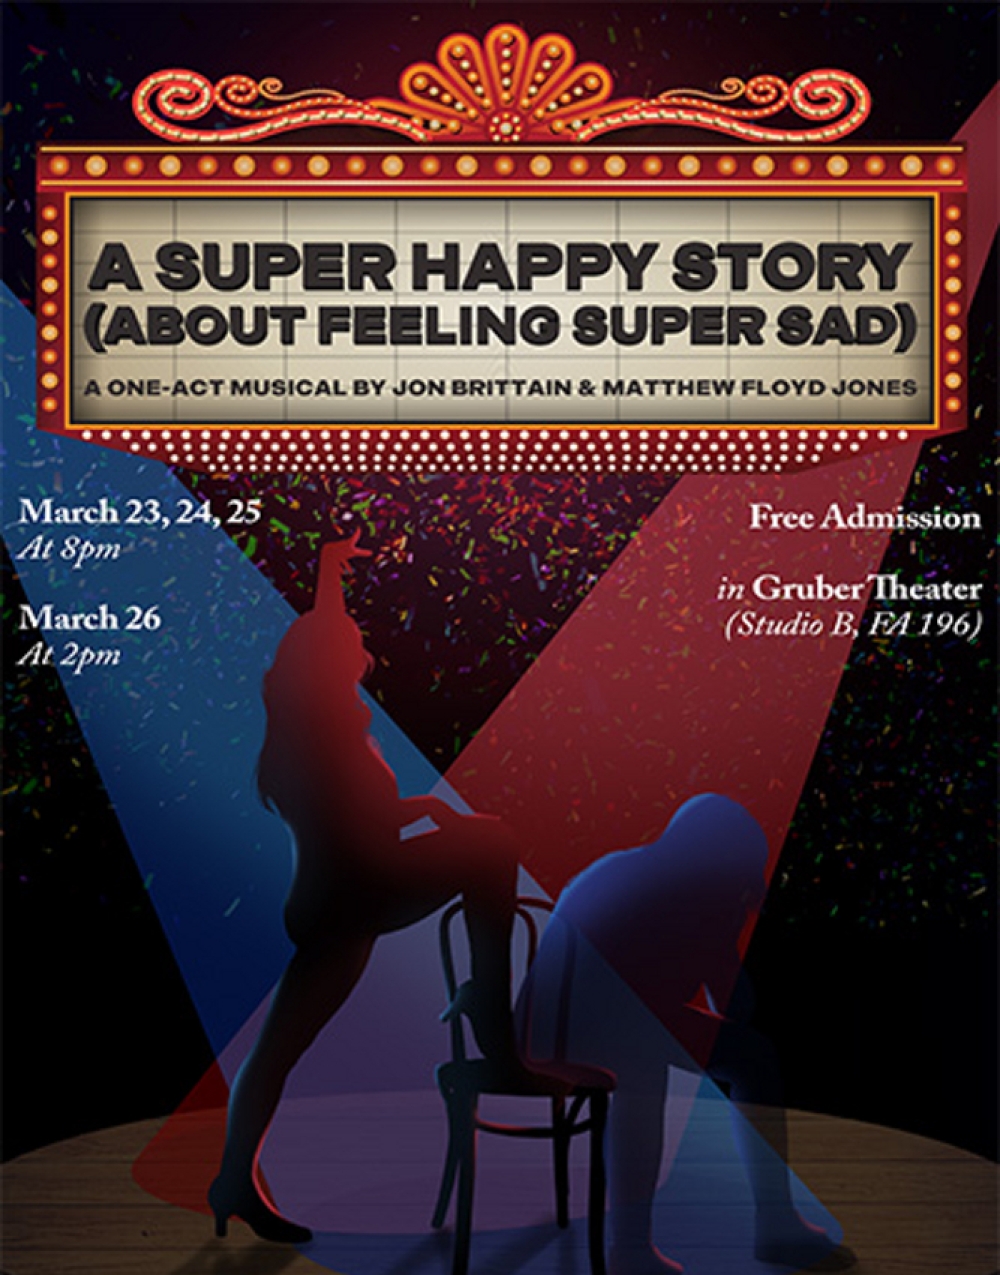 A Super Happy Story (About Being Super Sad) - Gruber Theater (Studio B, FA 196) Stage Mag